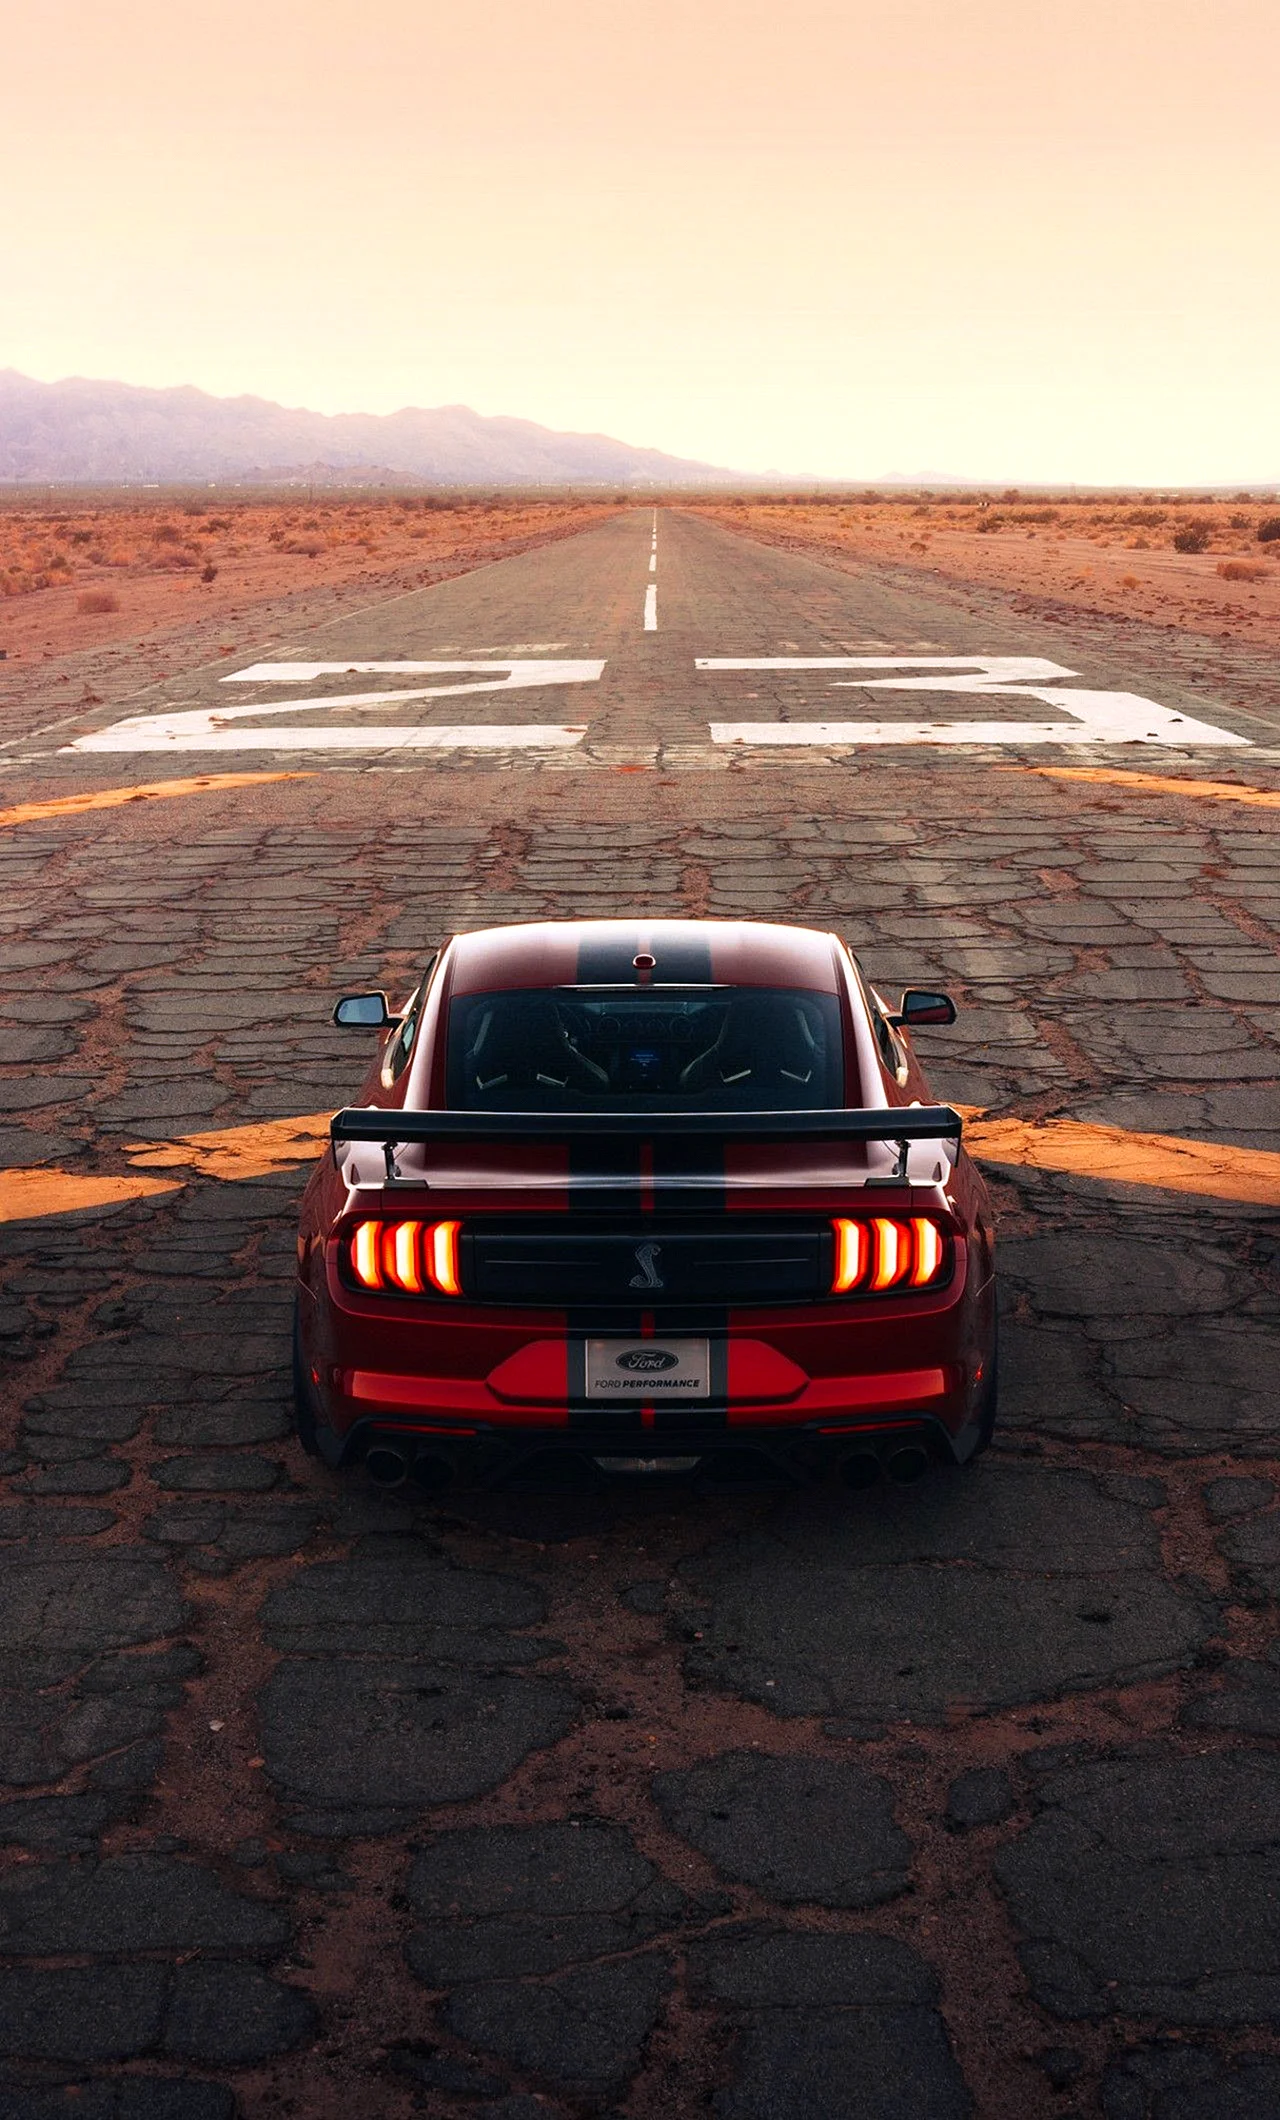 Ford Mustang 4K Wallpaper For iPhone